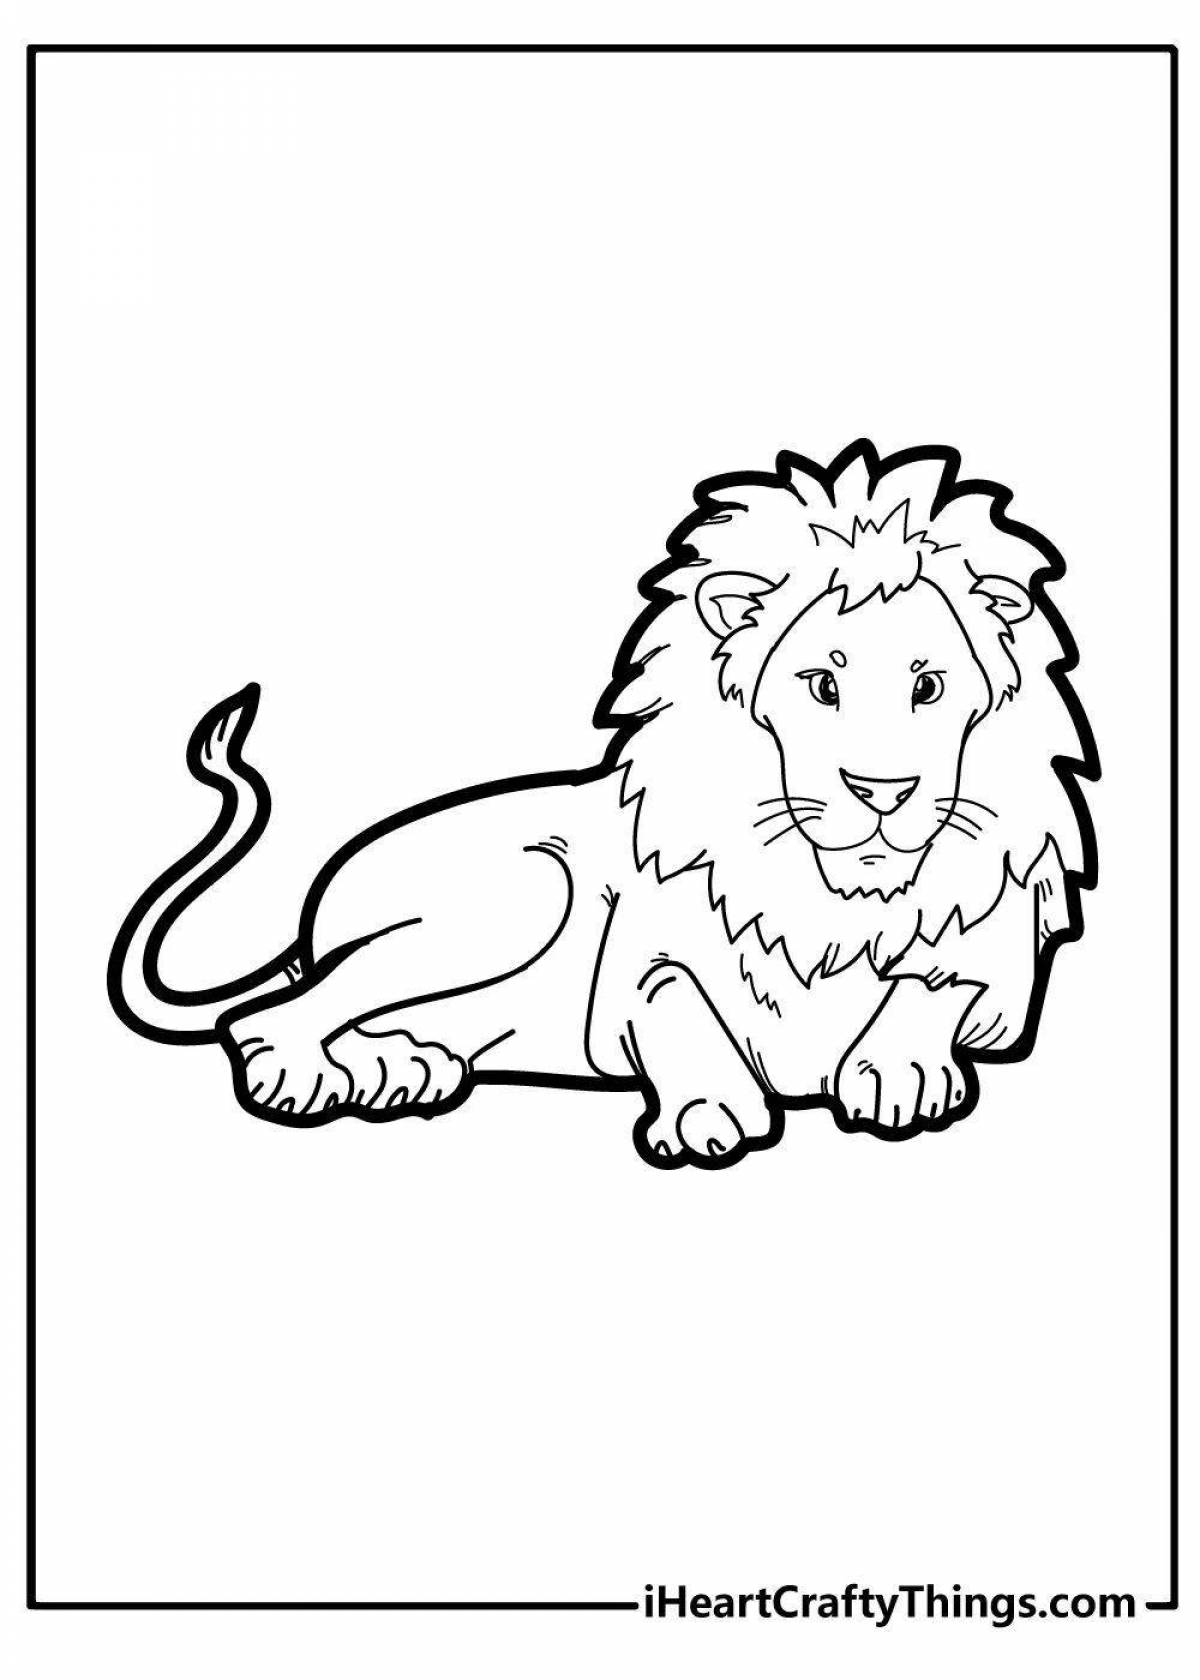 Lion head coloring page